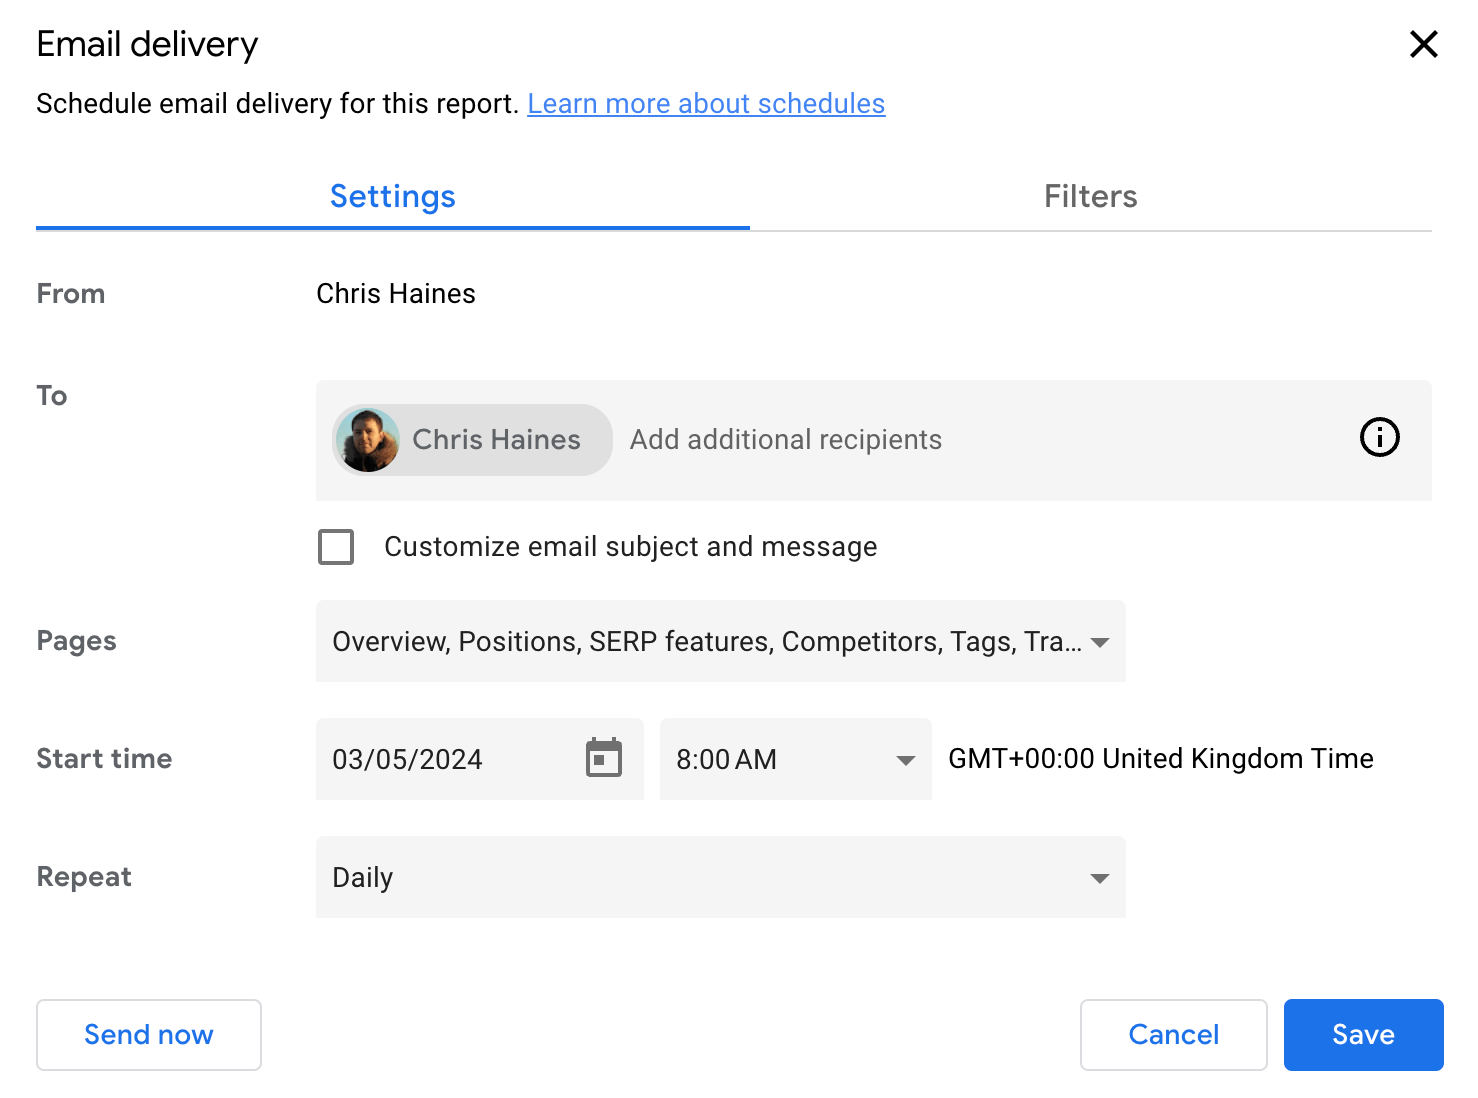 Adding recipients to the scheduled email 